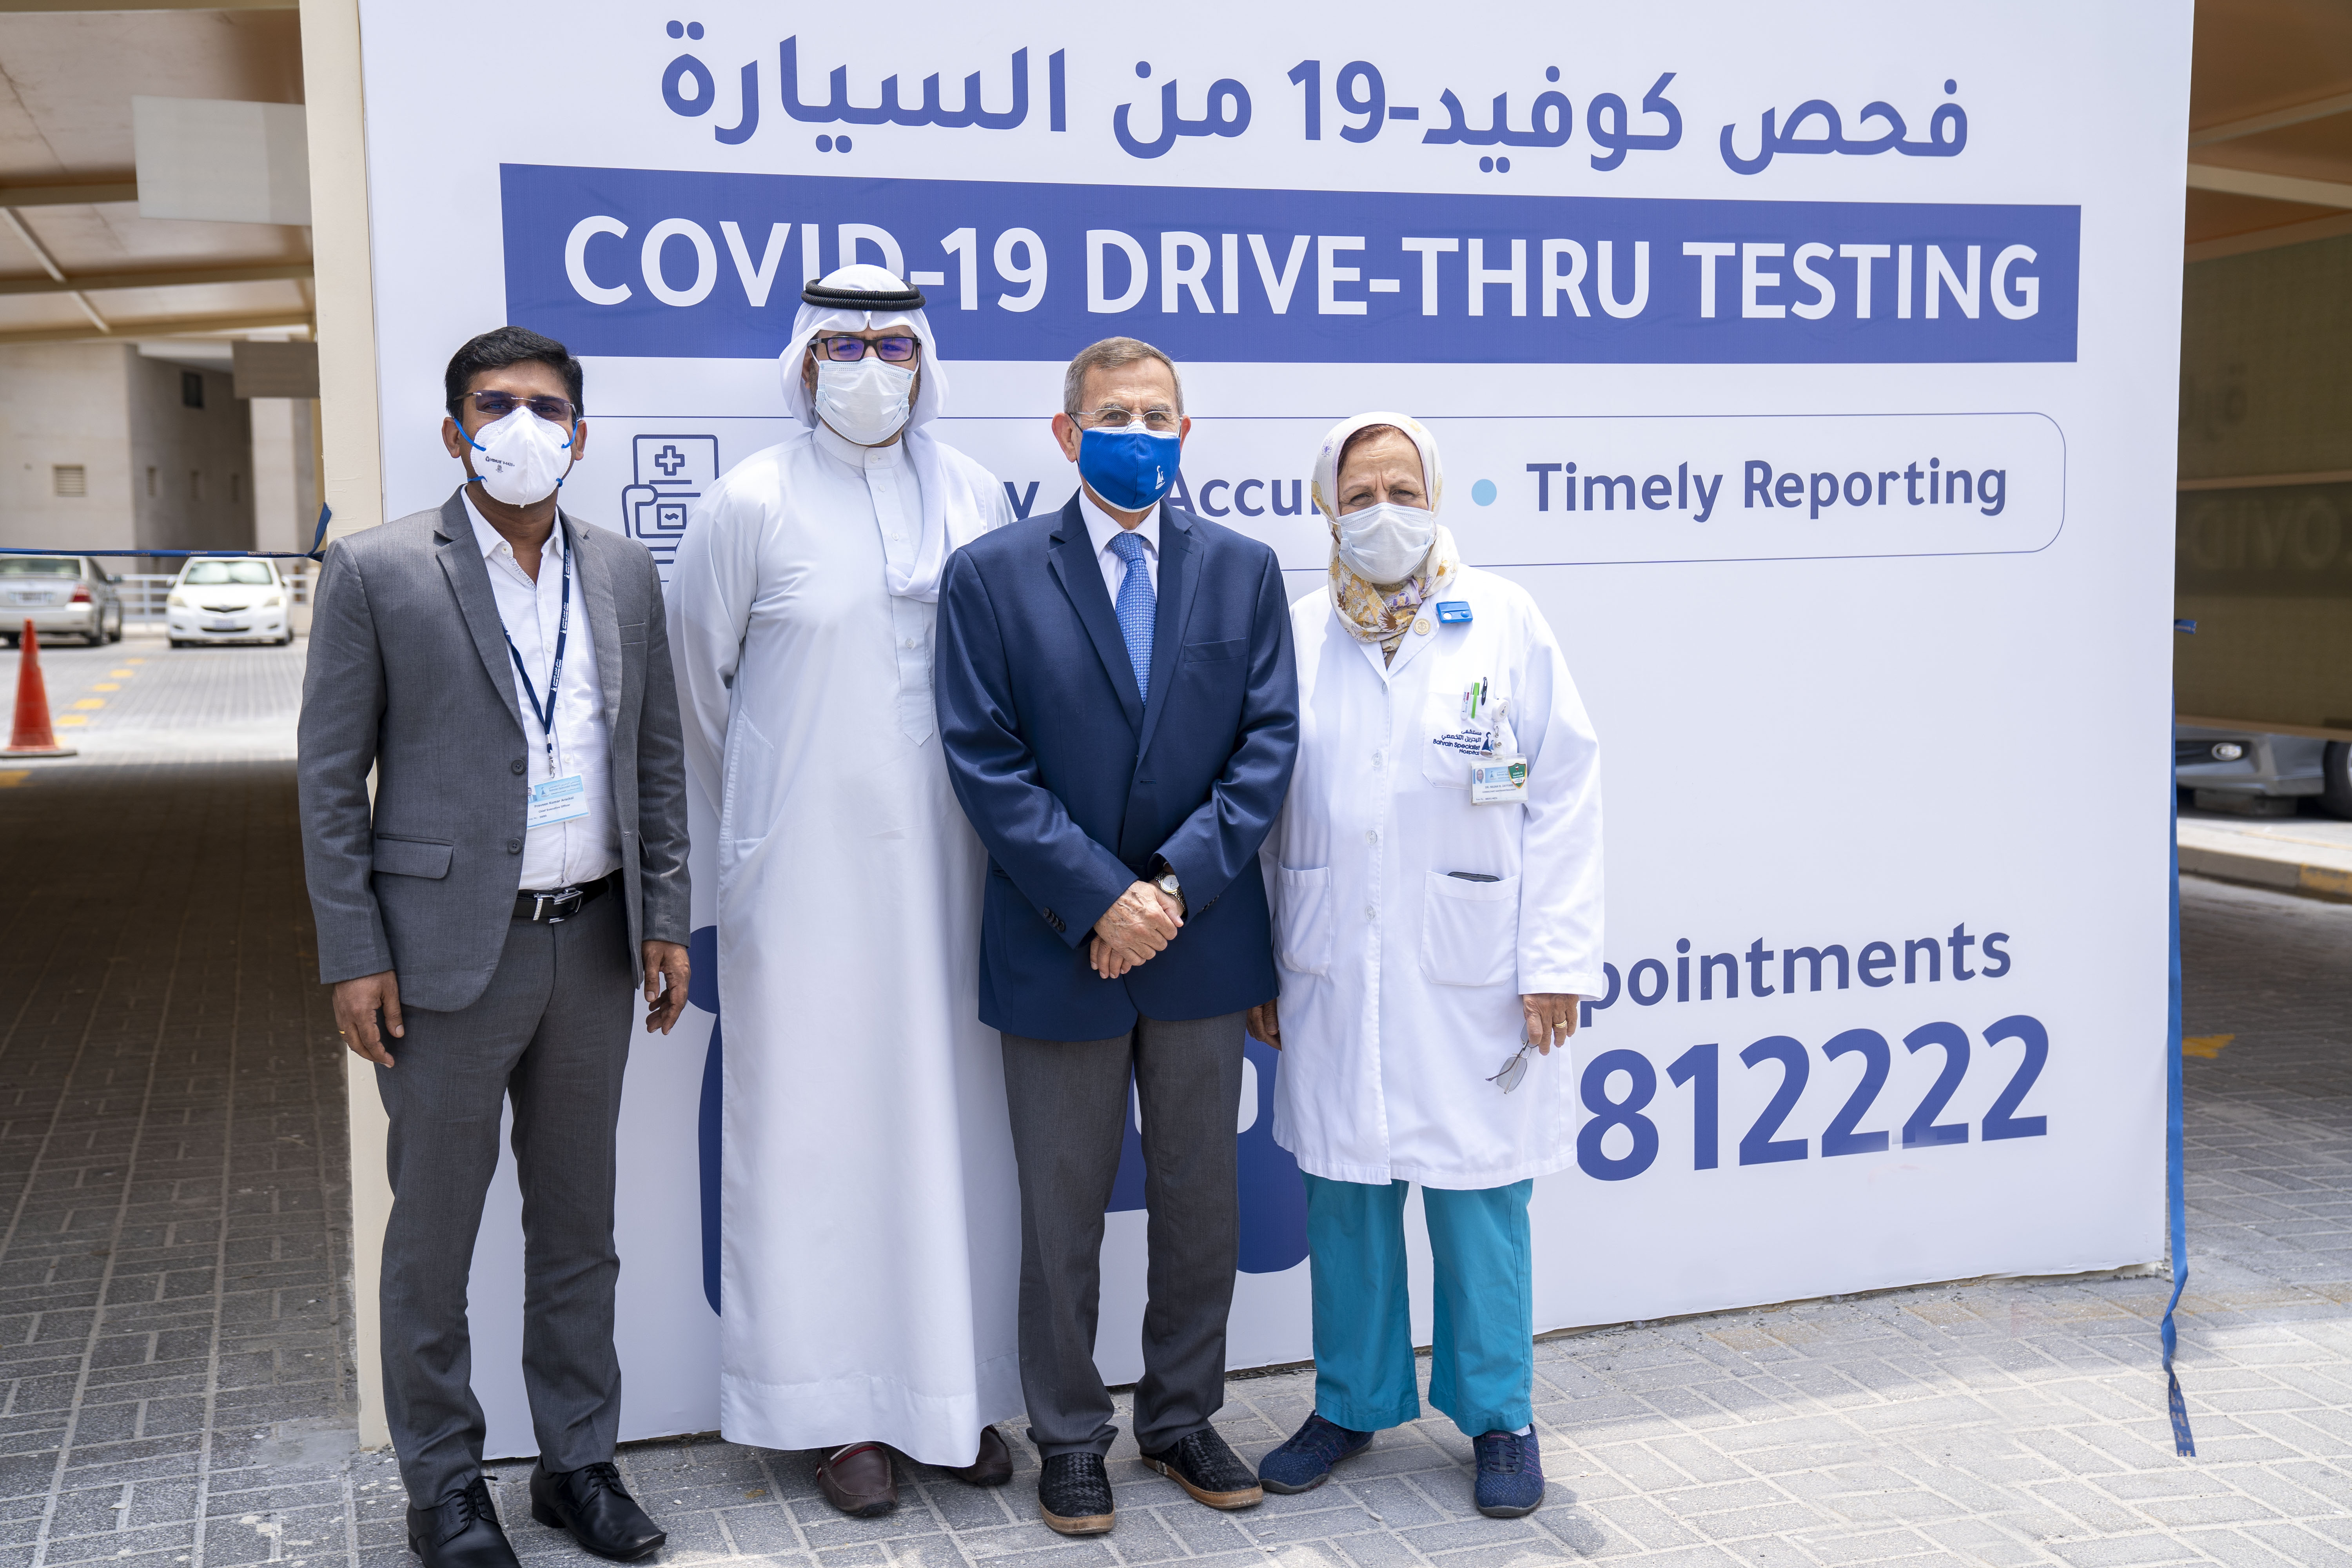 Bahrain Specialist Hospital sets up Drive Thru COVID 19 Testing Facility and launches Mobile Medical Unit